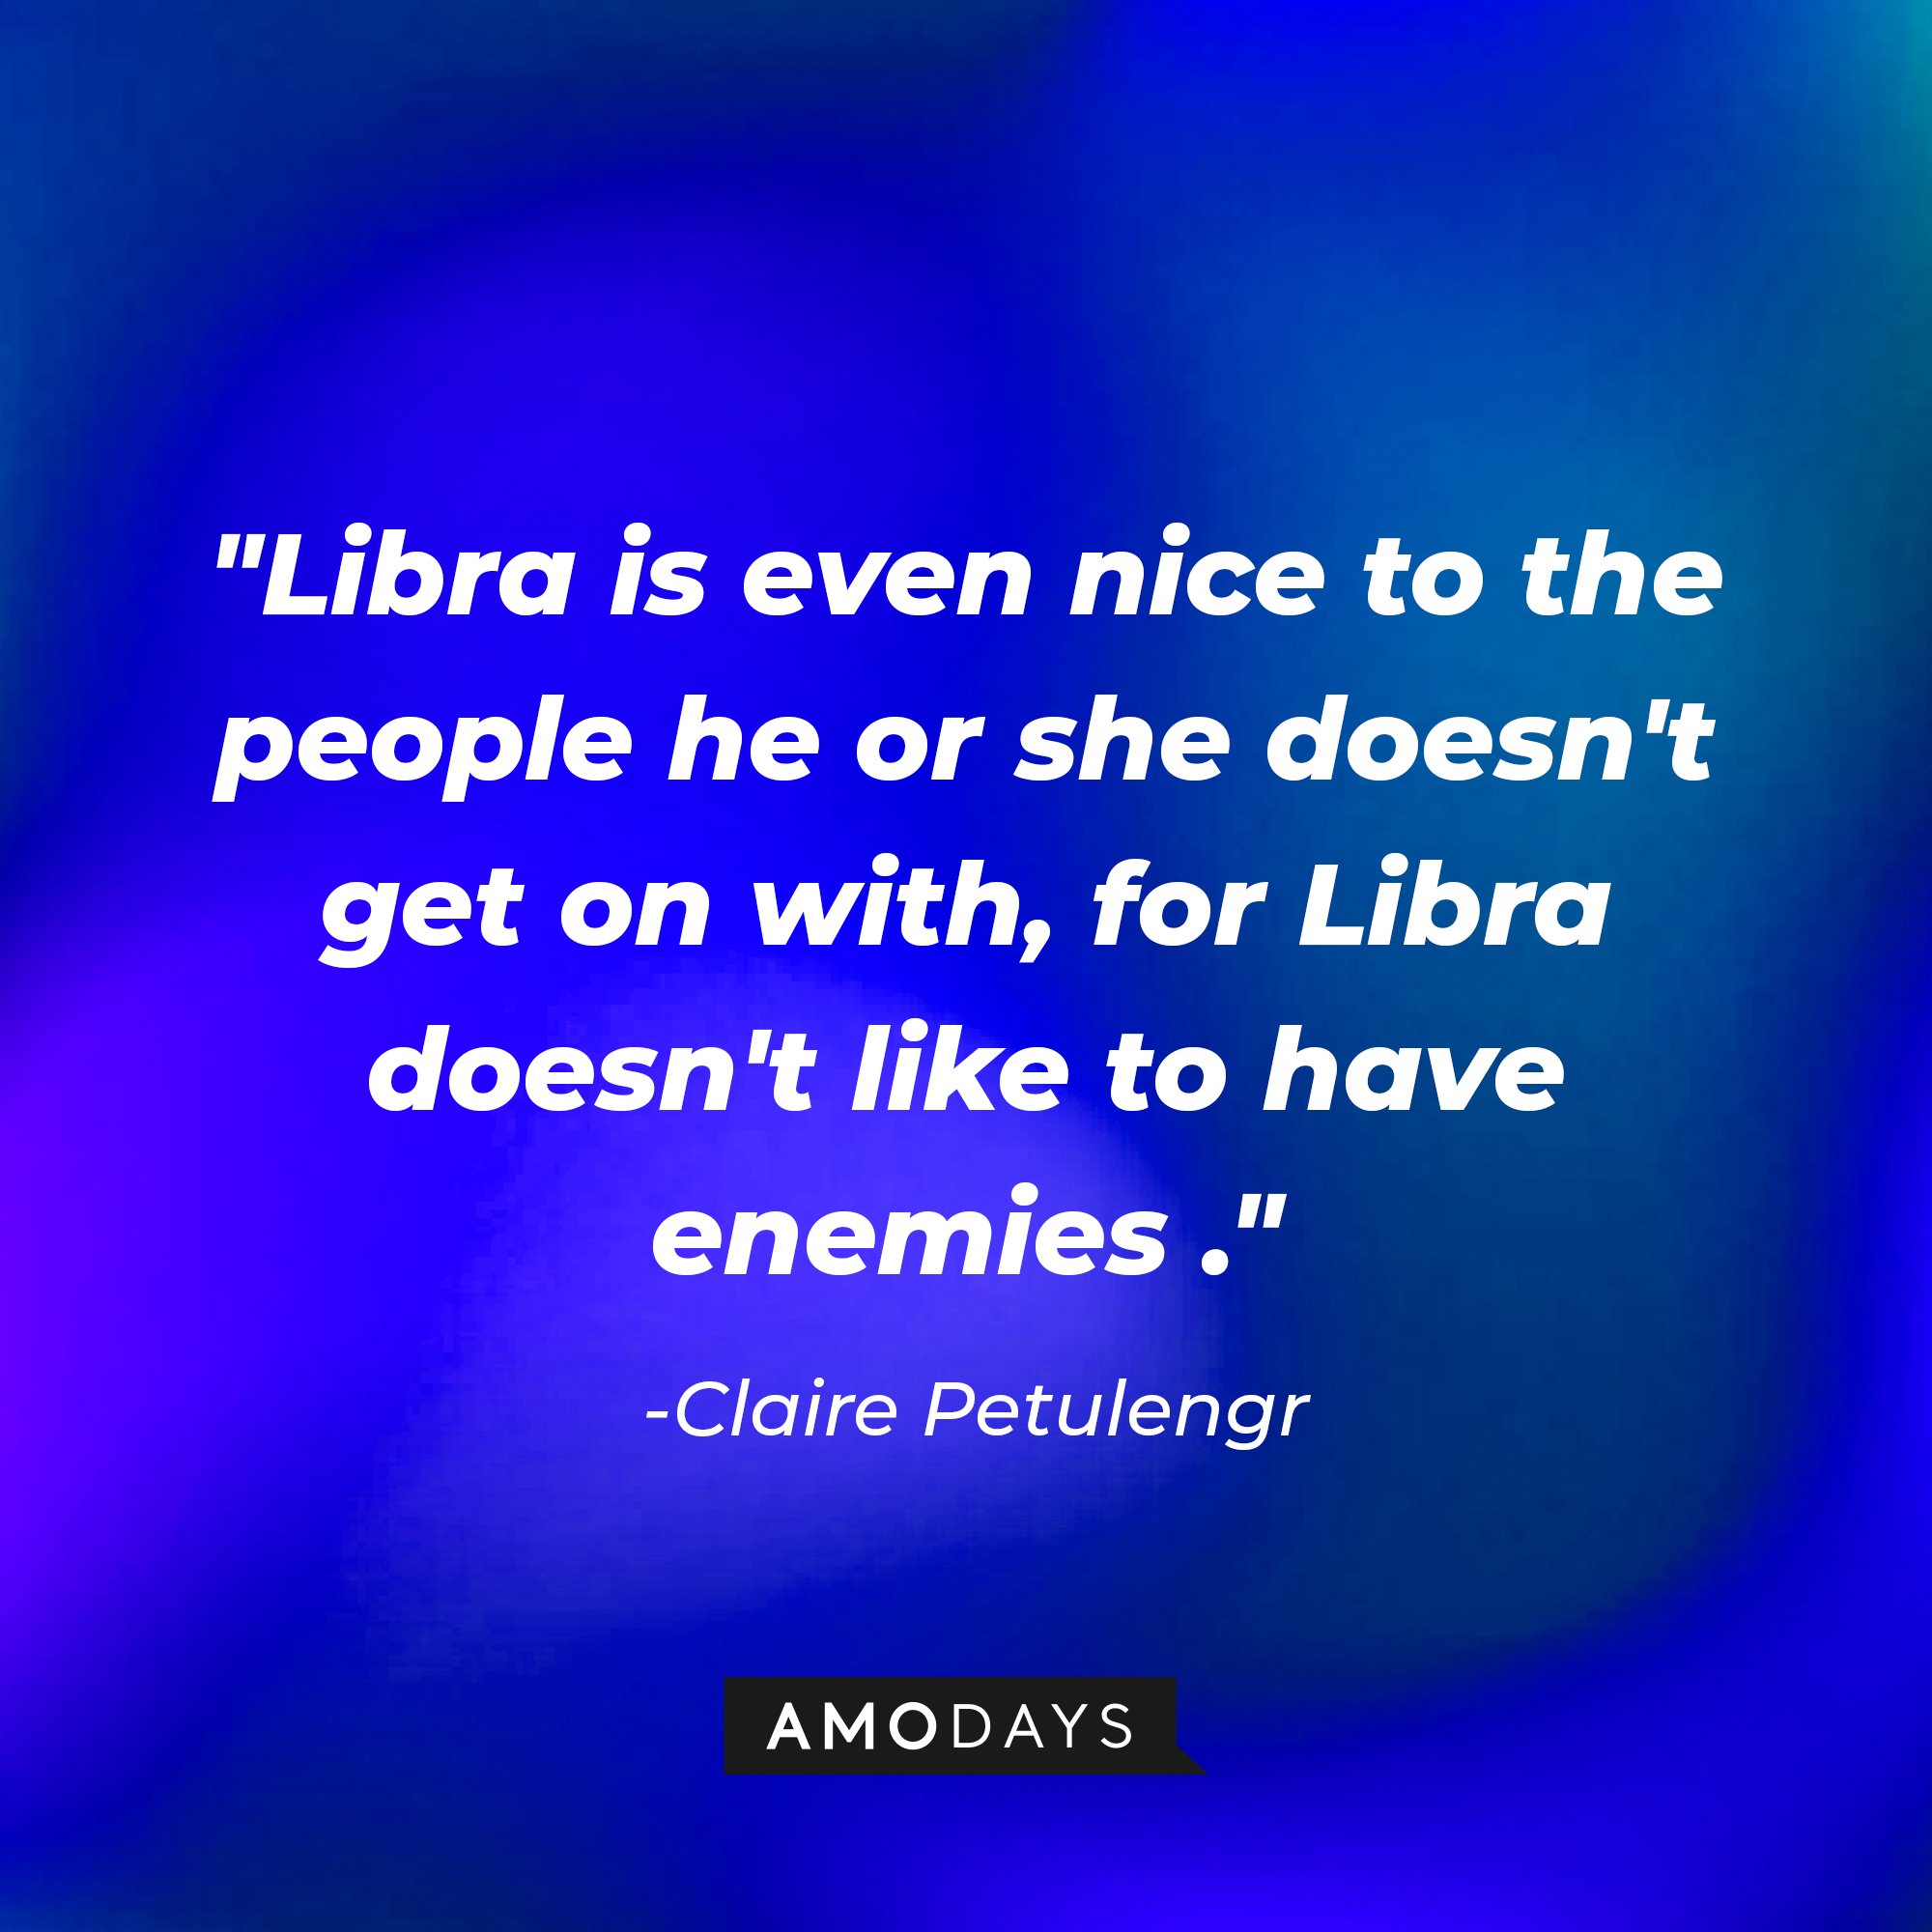 Claire Petulengr's quote: "Libra is even nice to the people he or she doesn't get on with, for Libra doesn't like to have enemies." | Image: AmoDays 